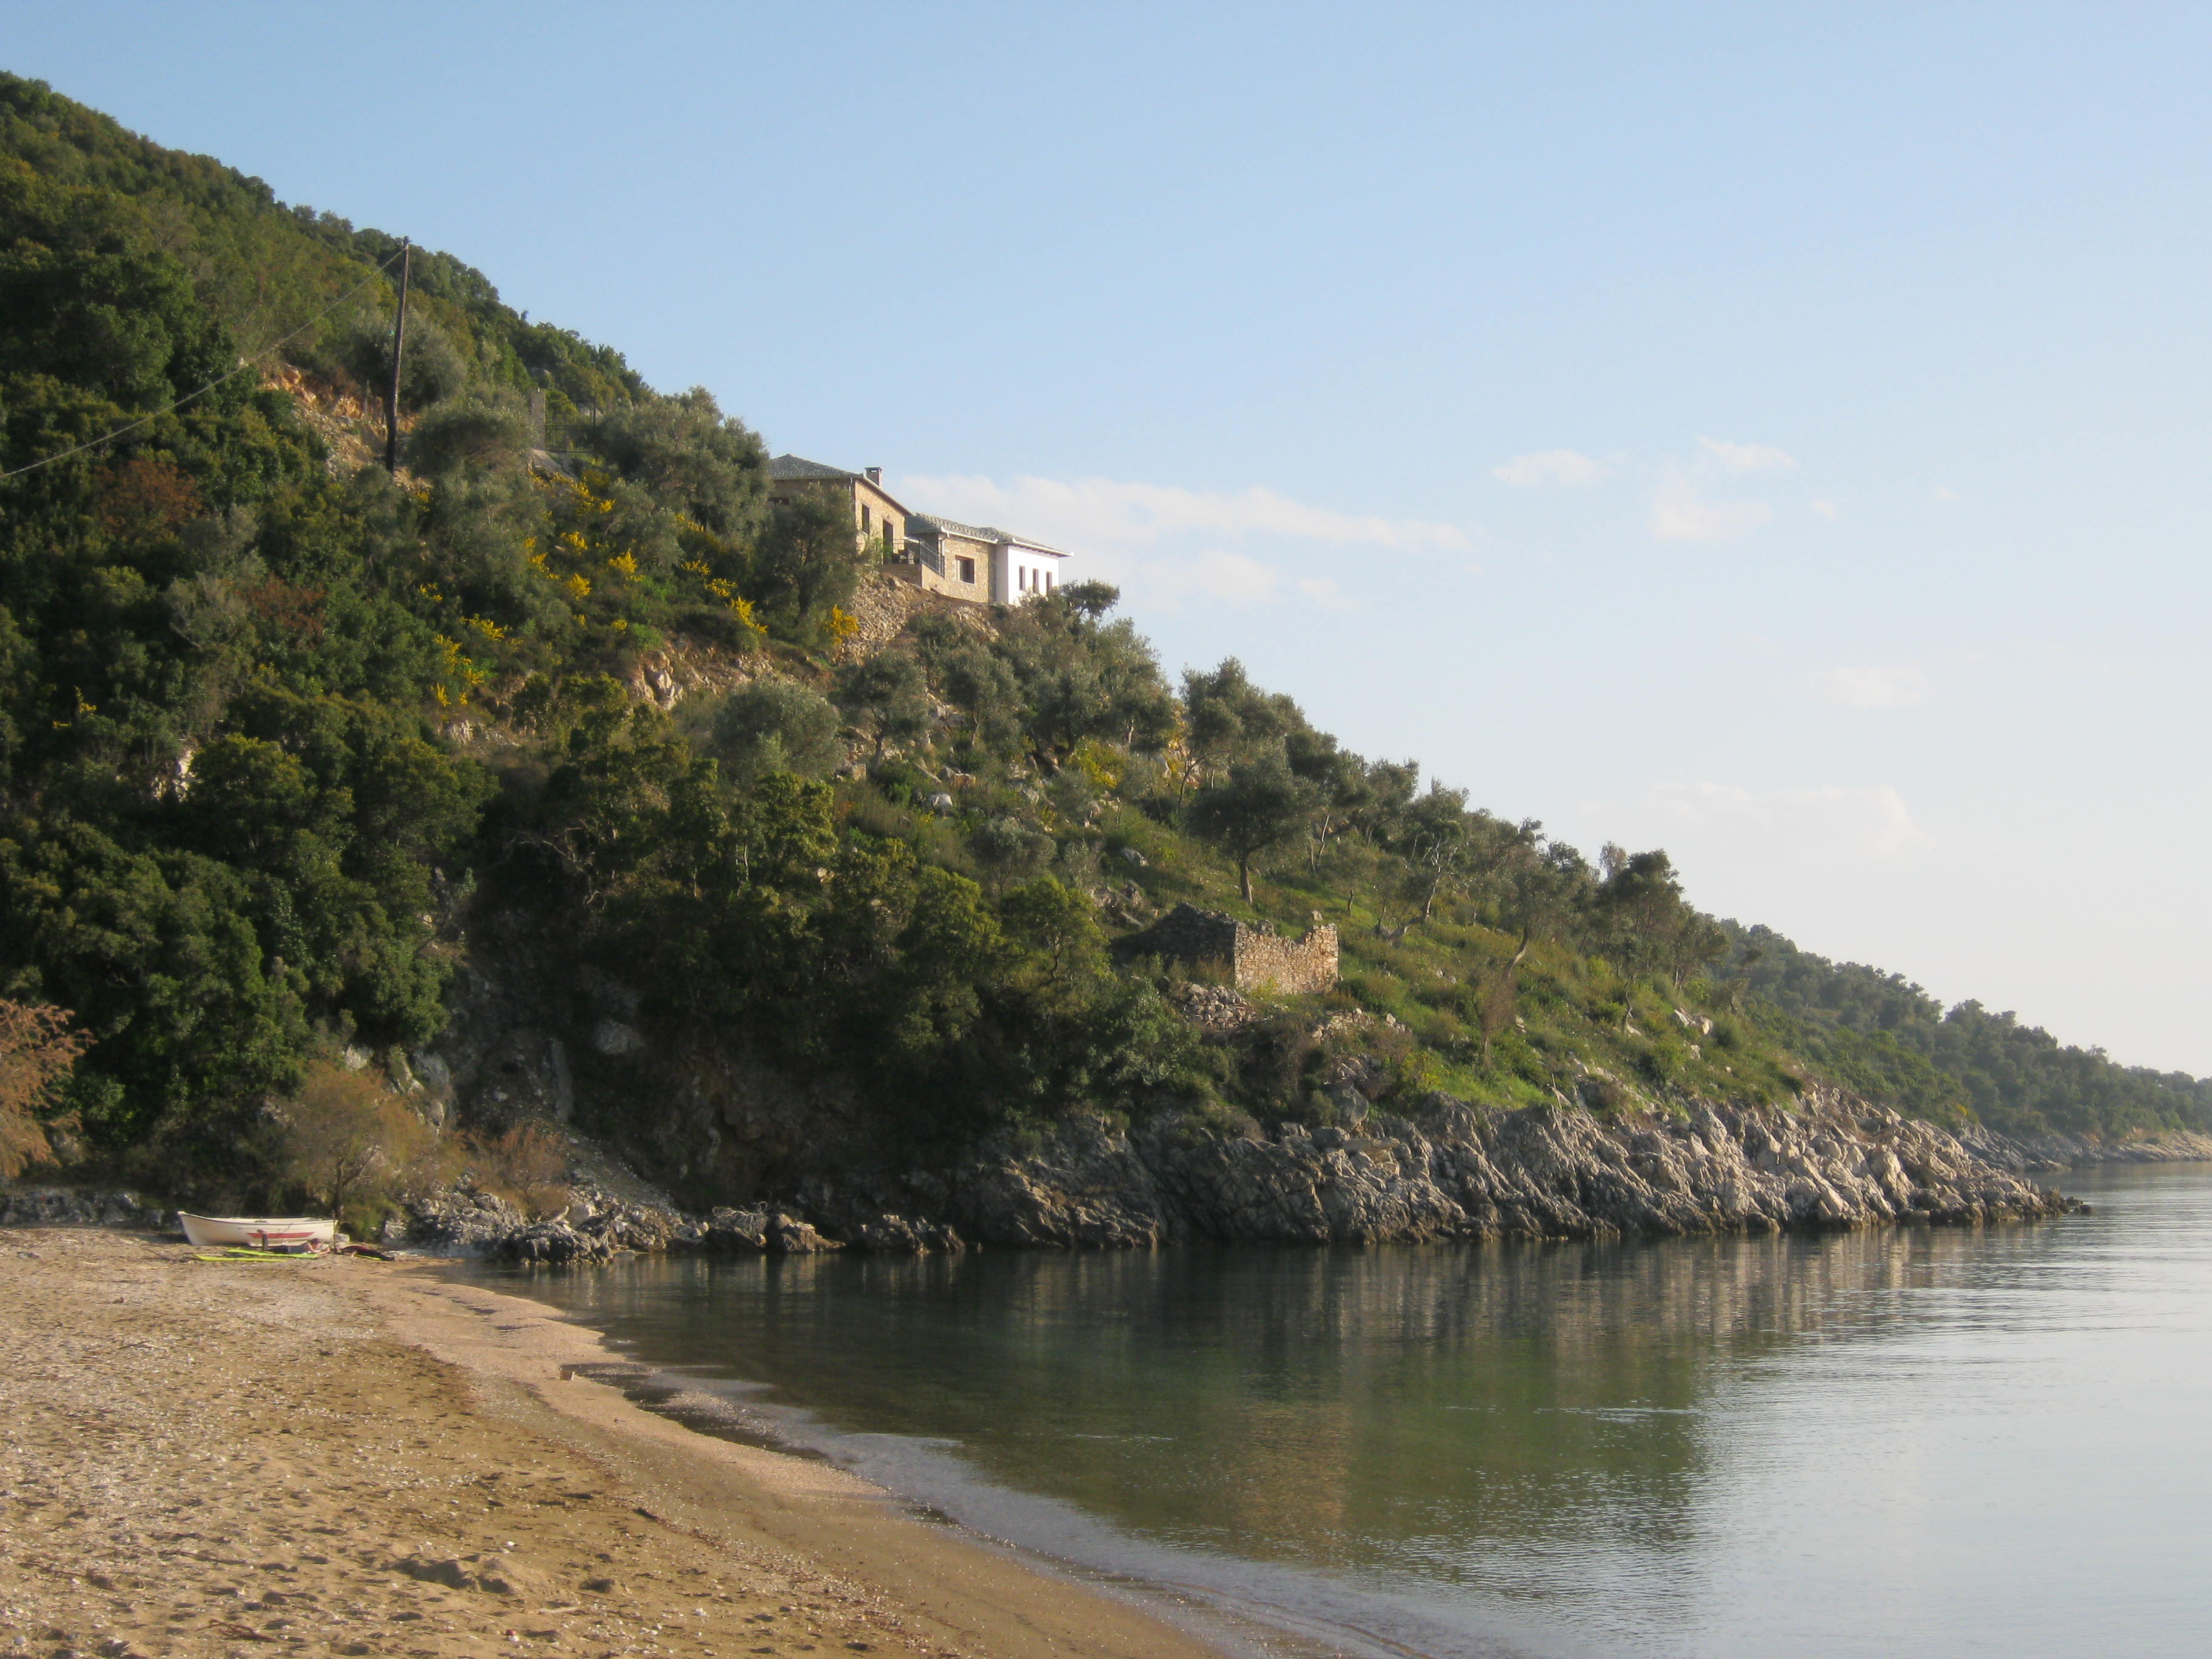 View of house from the beach